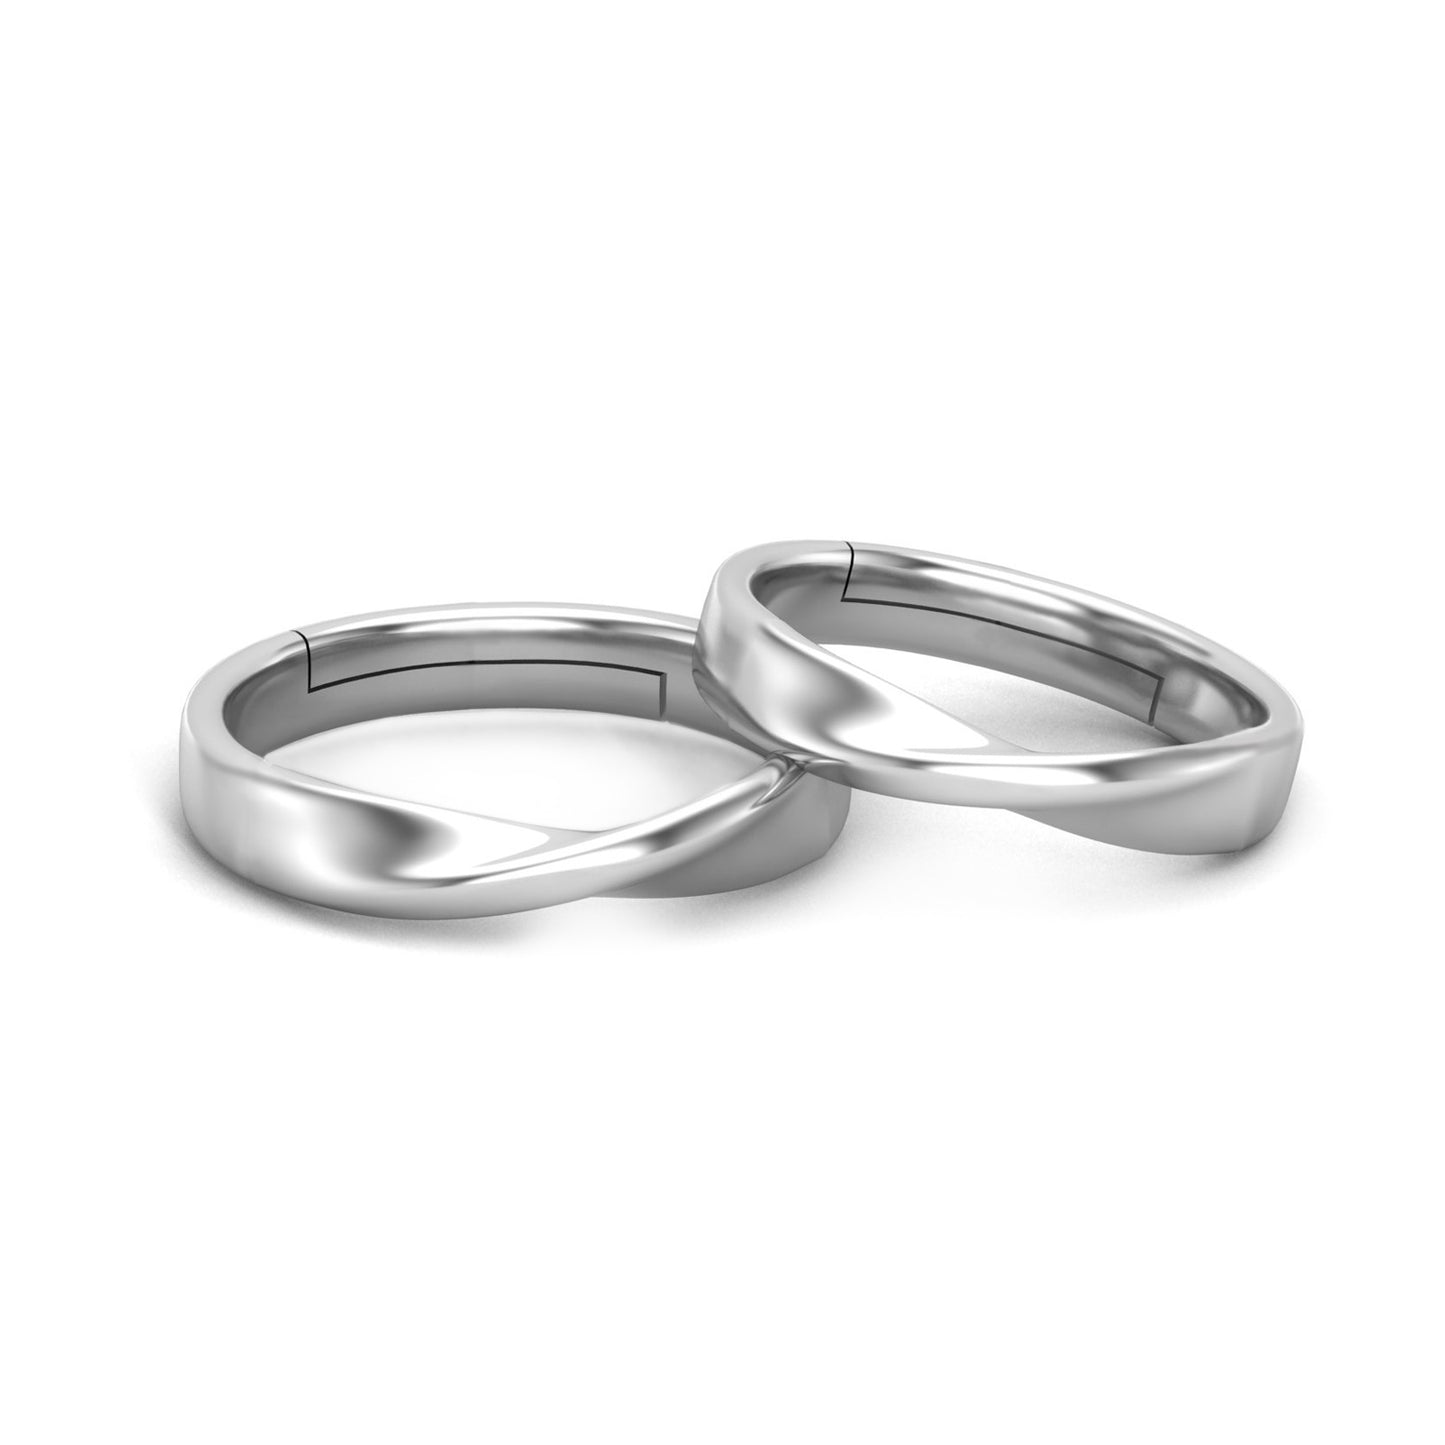 Jim & Pam Couple Ring - Fine Silver